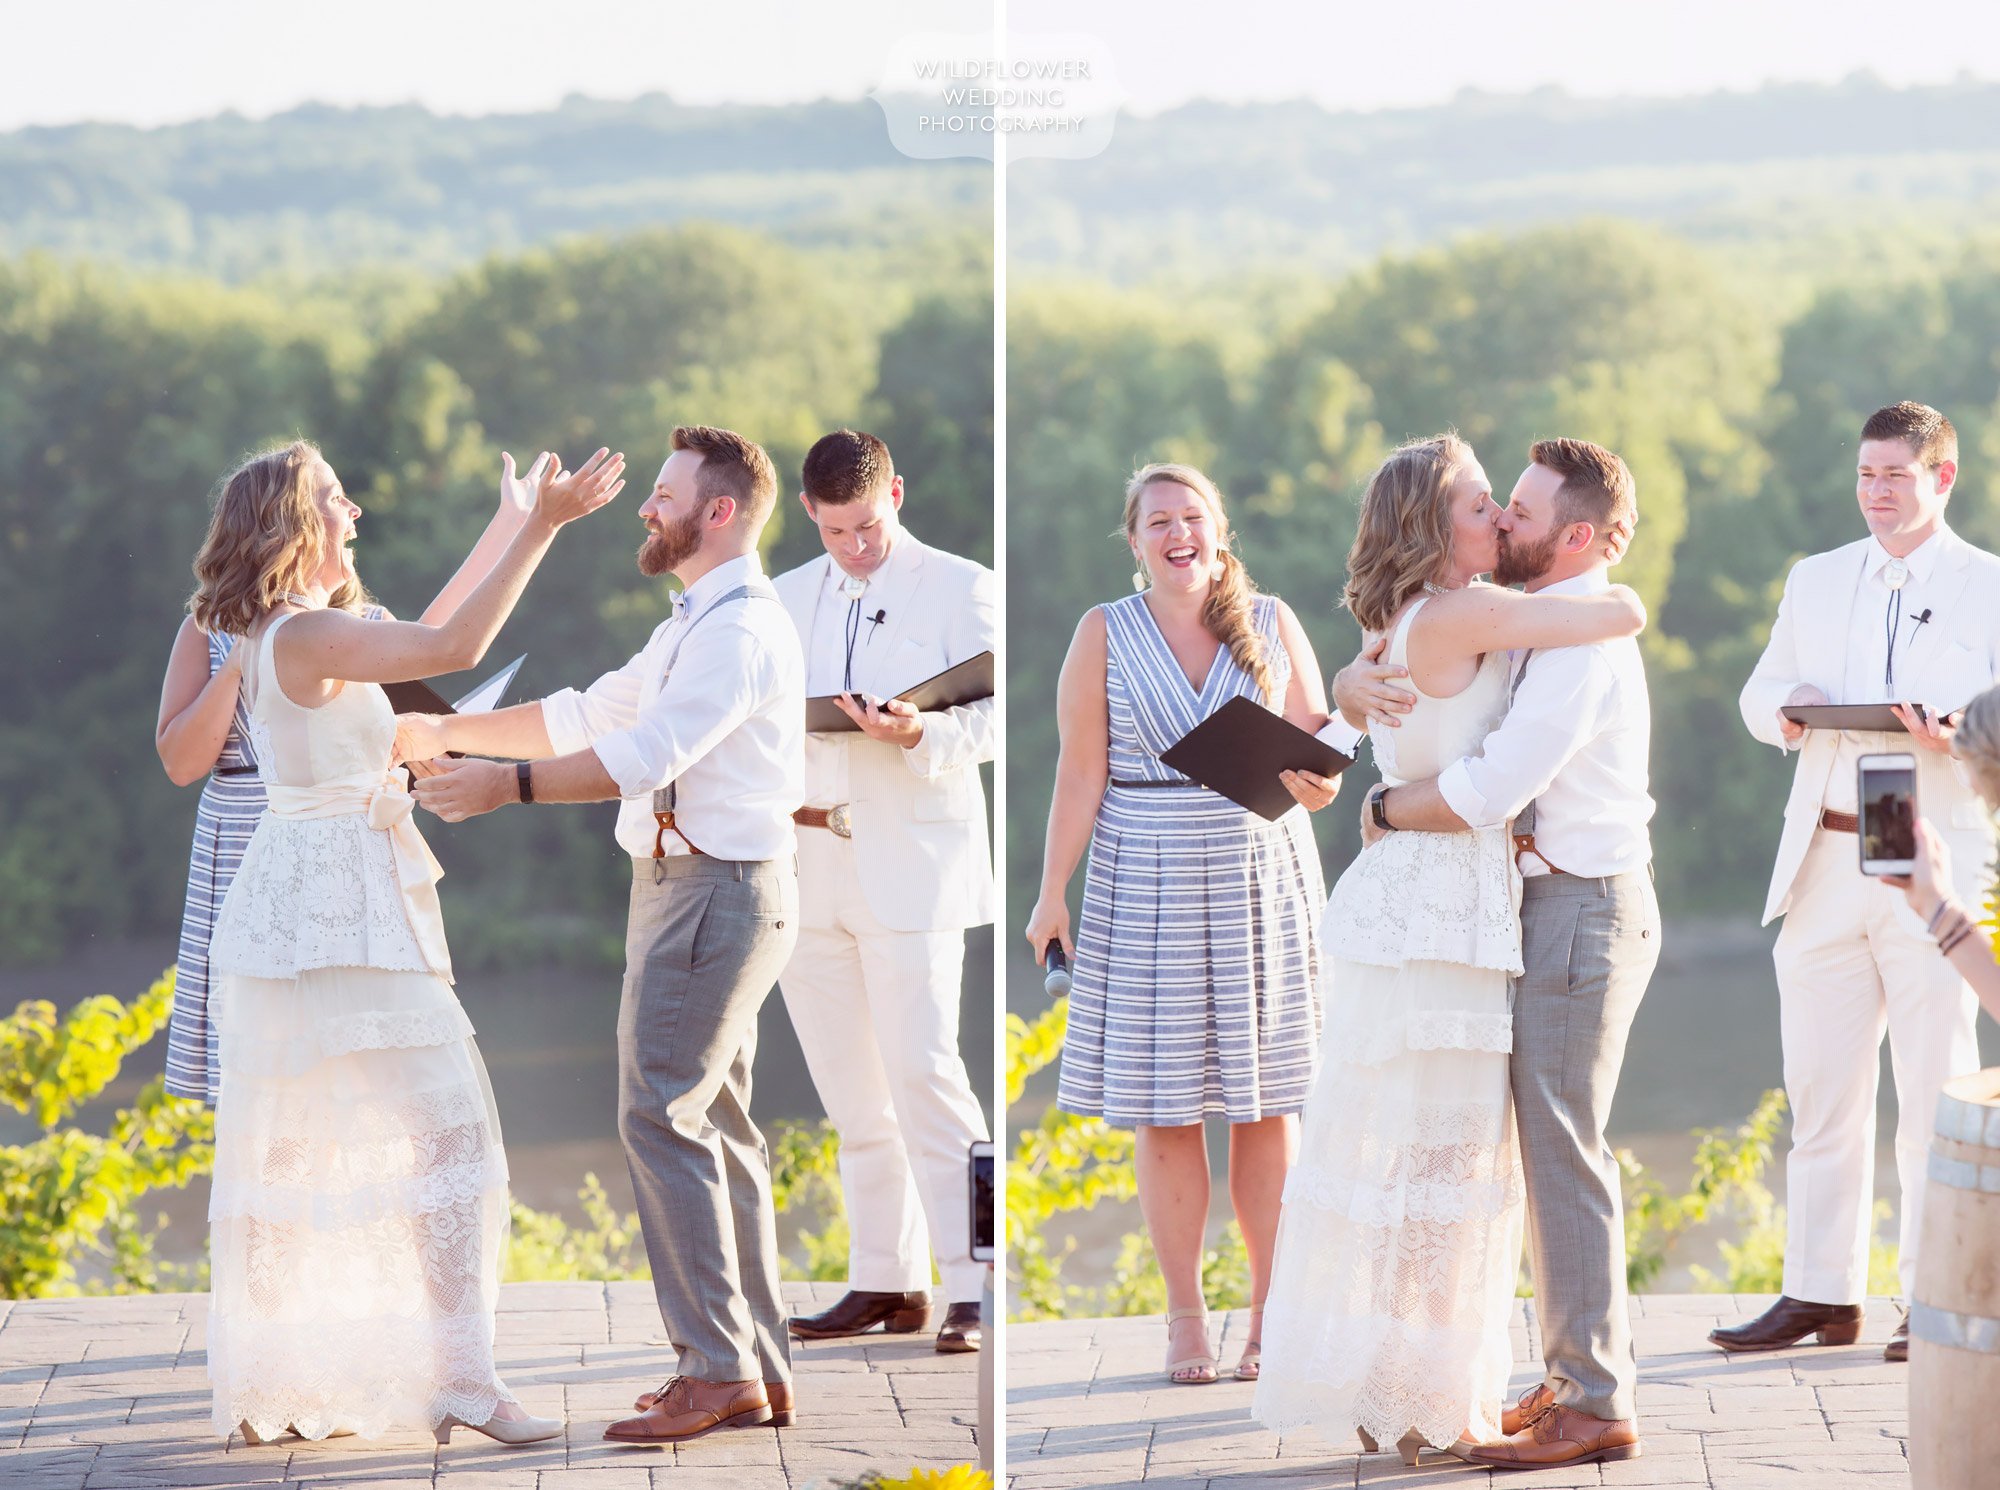 joyful wedding moment bride and groom throw hands in the air and kiss at end of ceremony